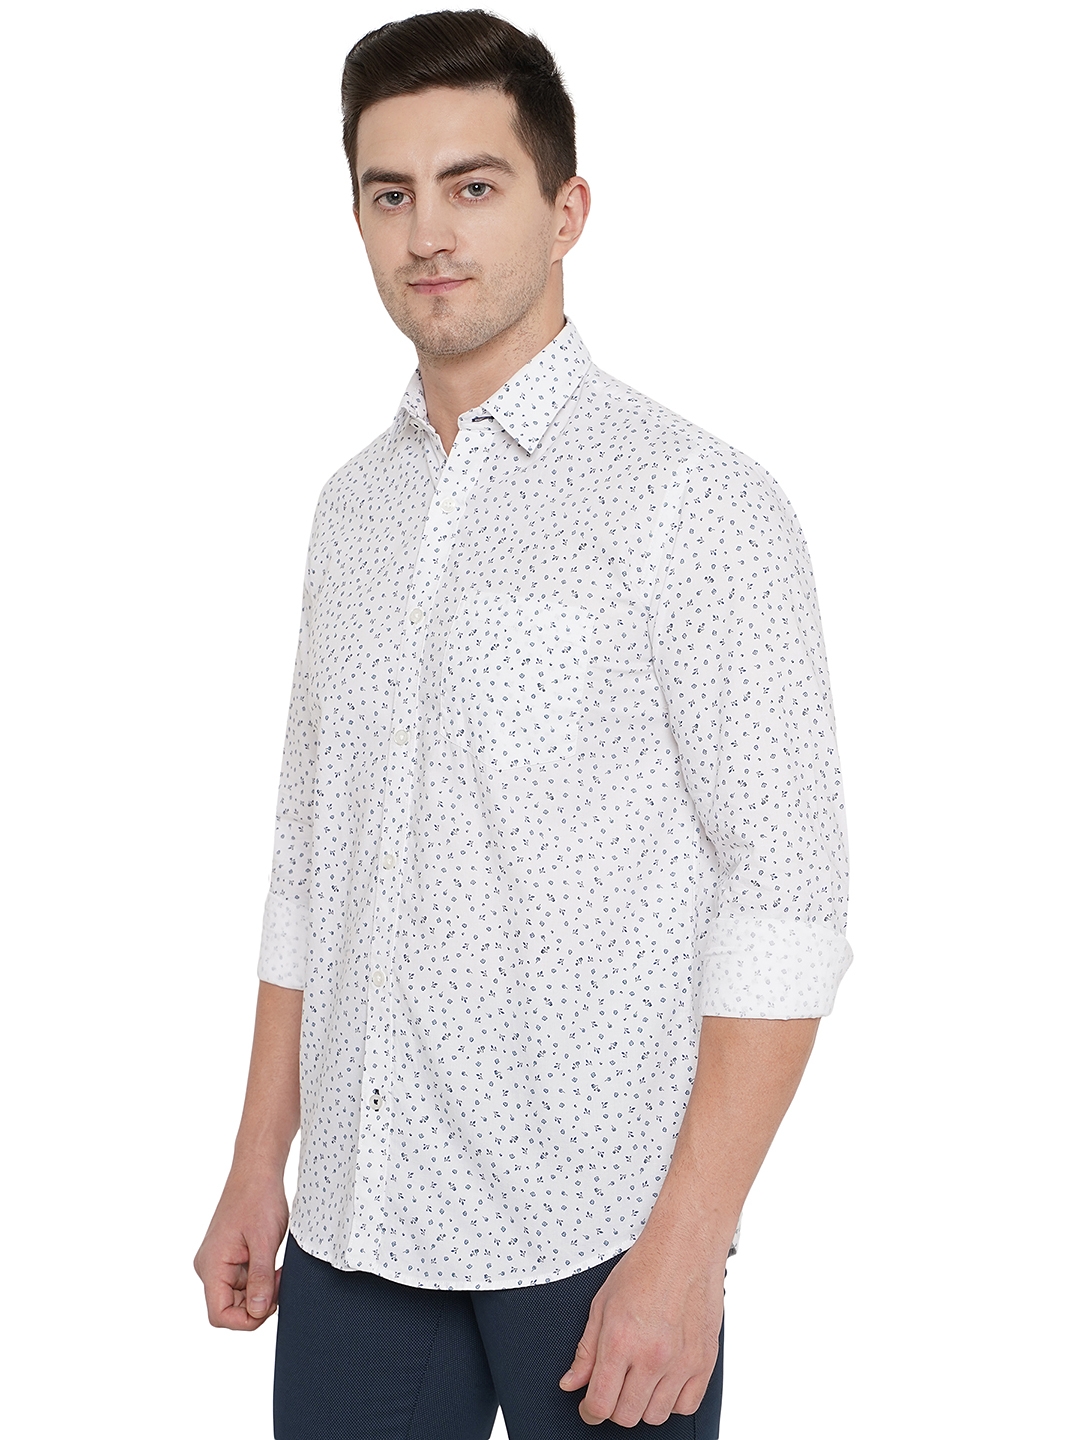 Greenfibre | White Printed Smart Fit Casual Shirt | Greenfibre 1